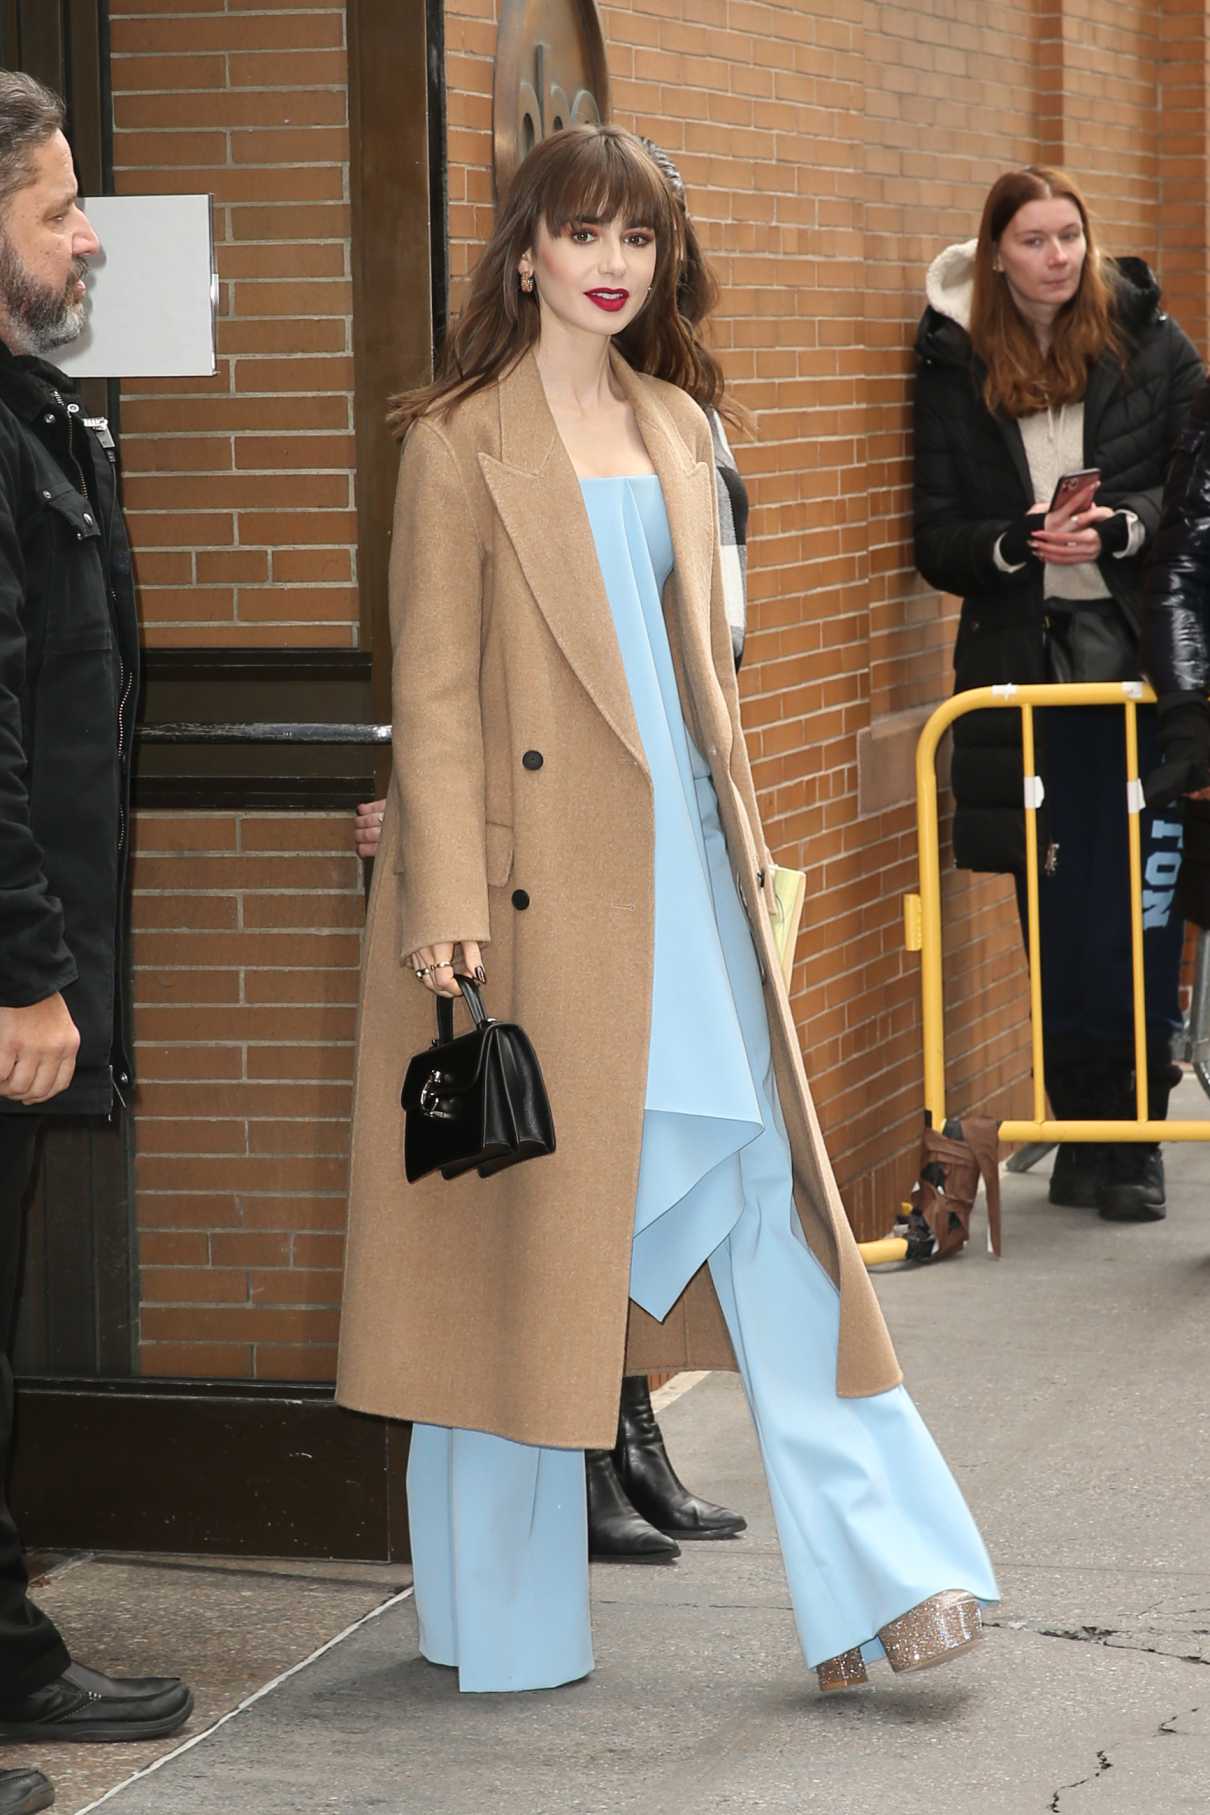 Lily Collins in a Caramel Coloured Coat